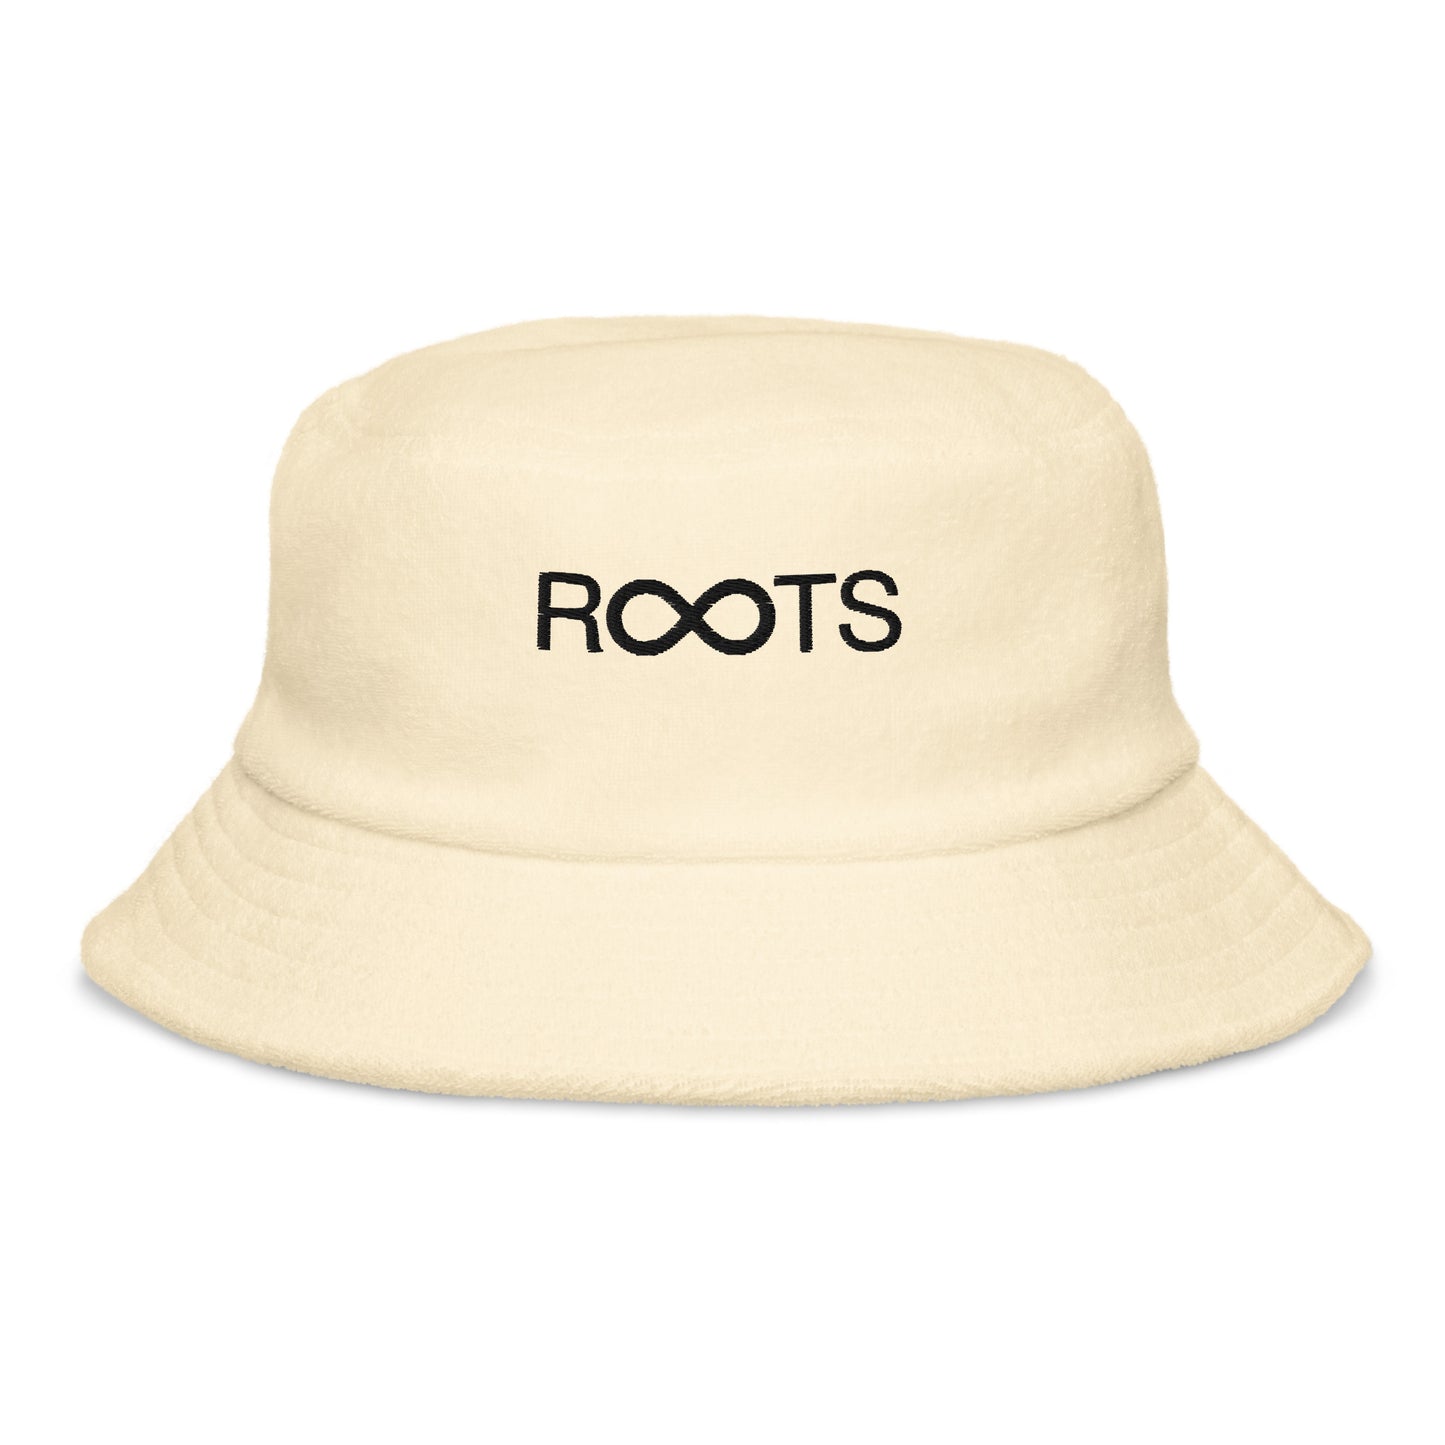 Roots Are Forever terry cloth bucket hat